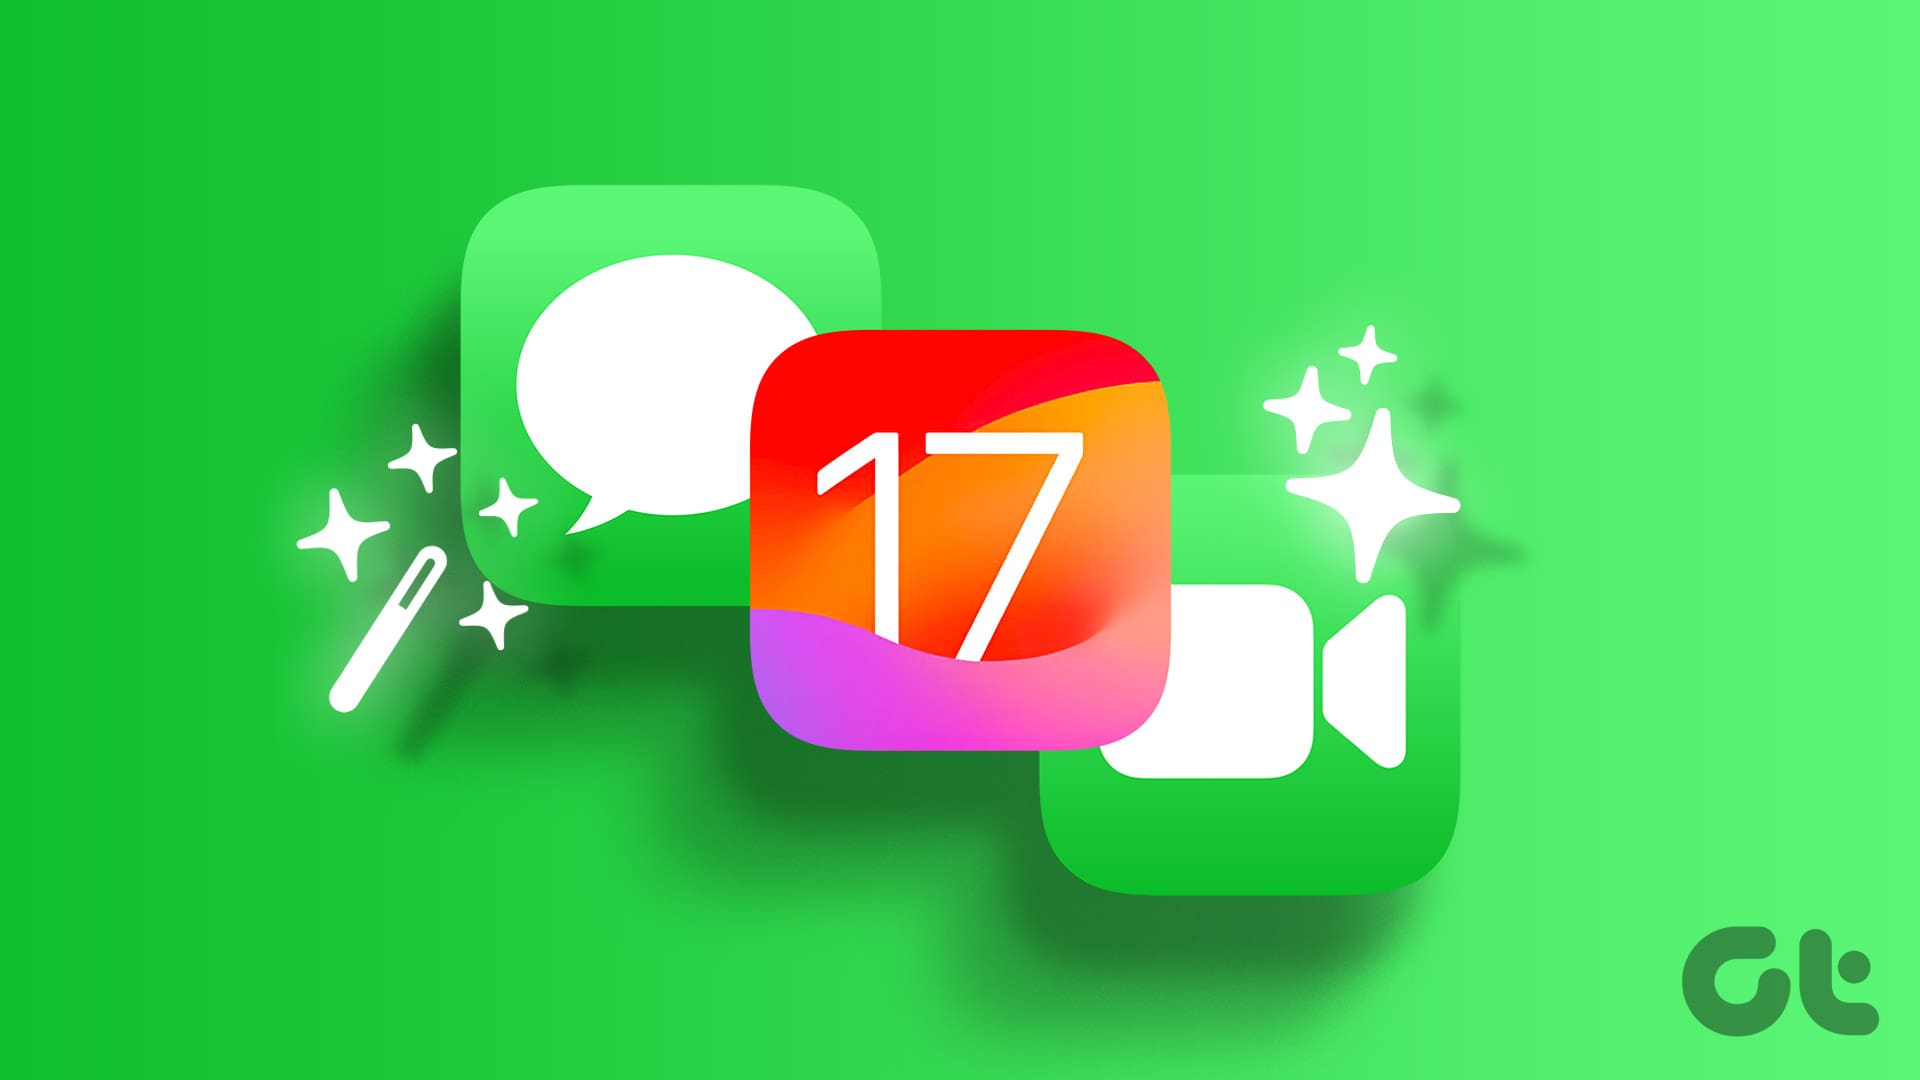 iOS 17 messages and facetime features